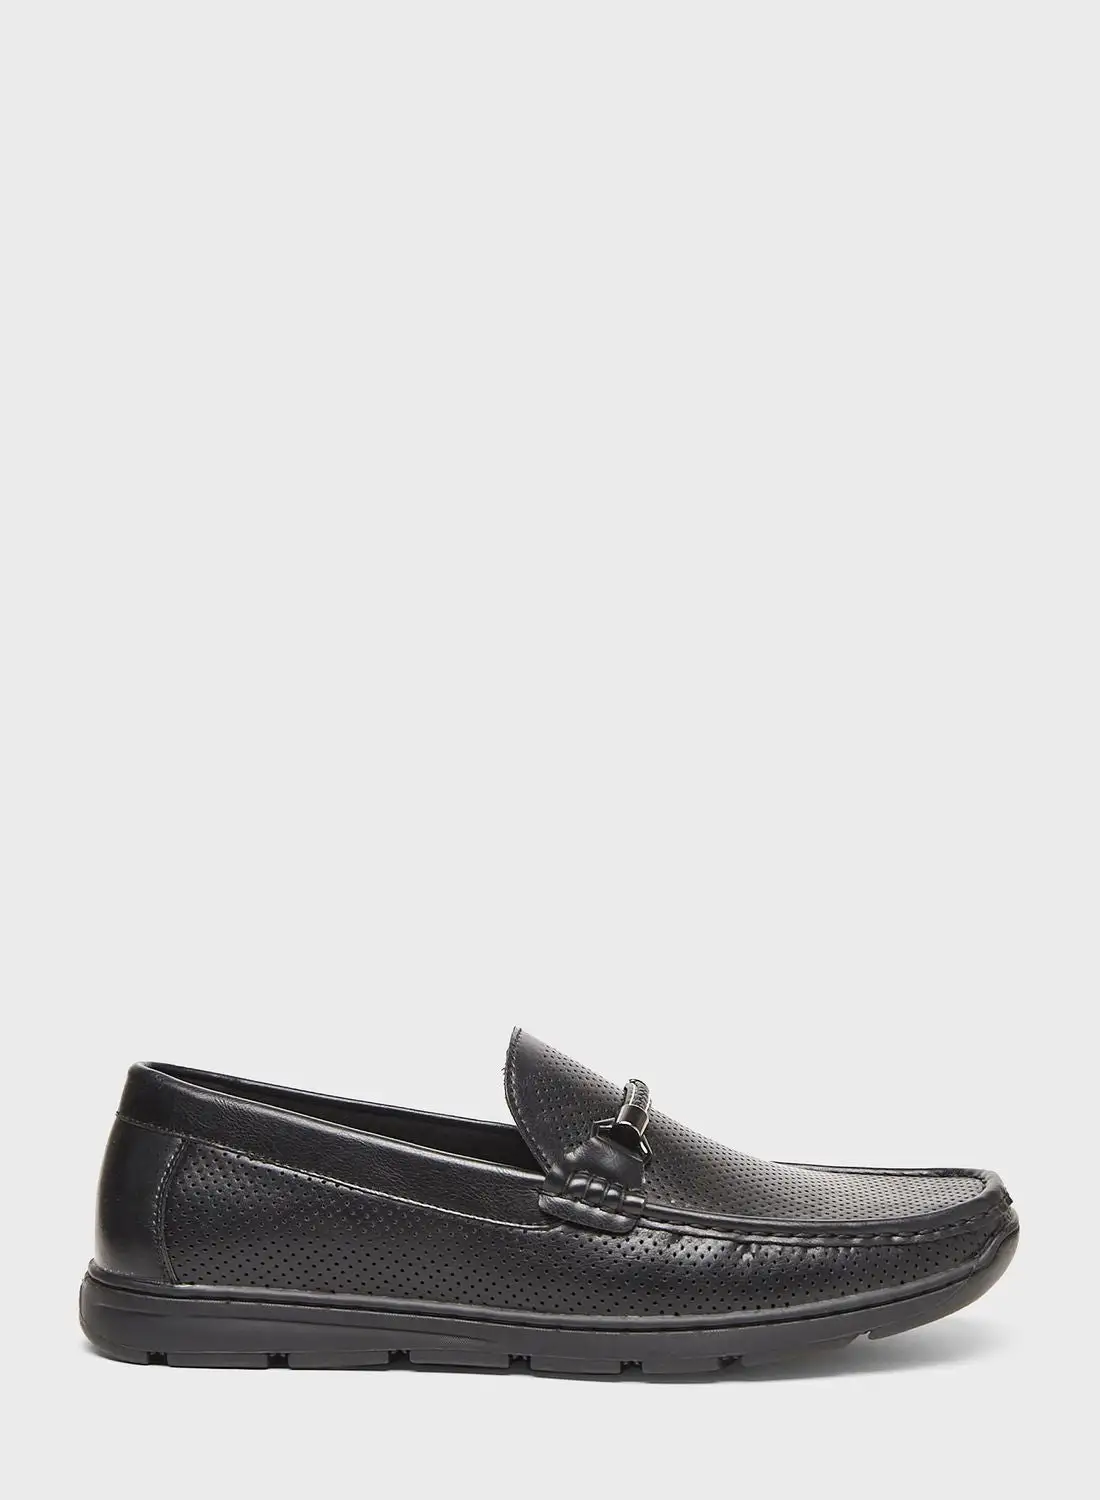 LBL by Shoexpress Casual Slip On Loafers